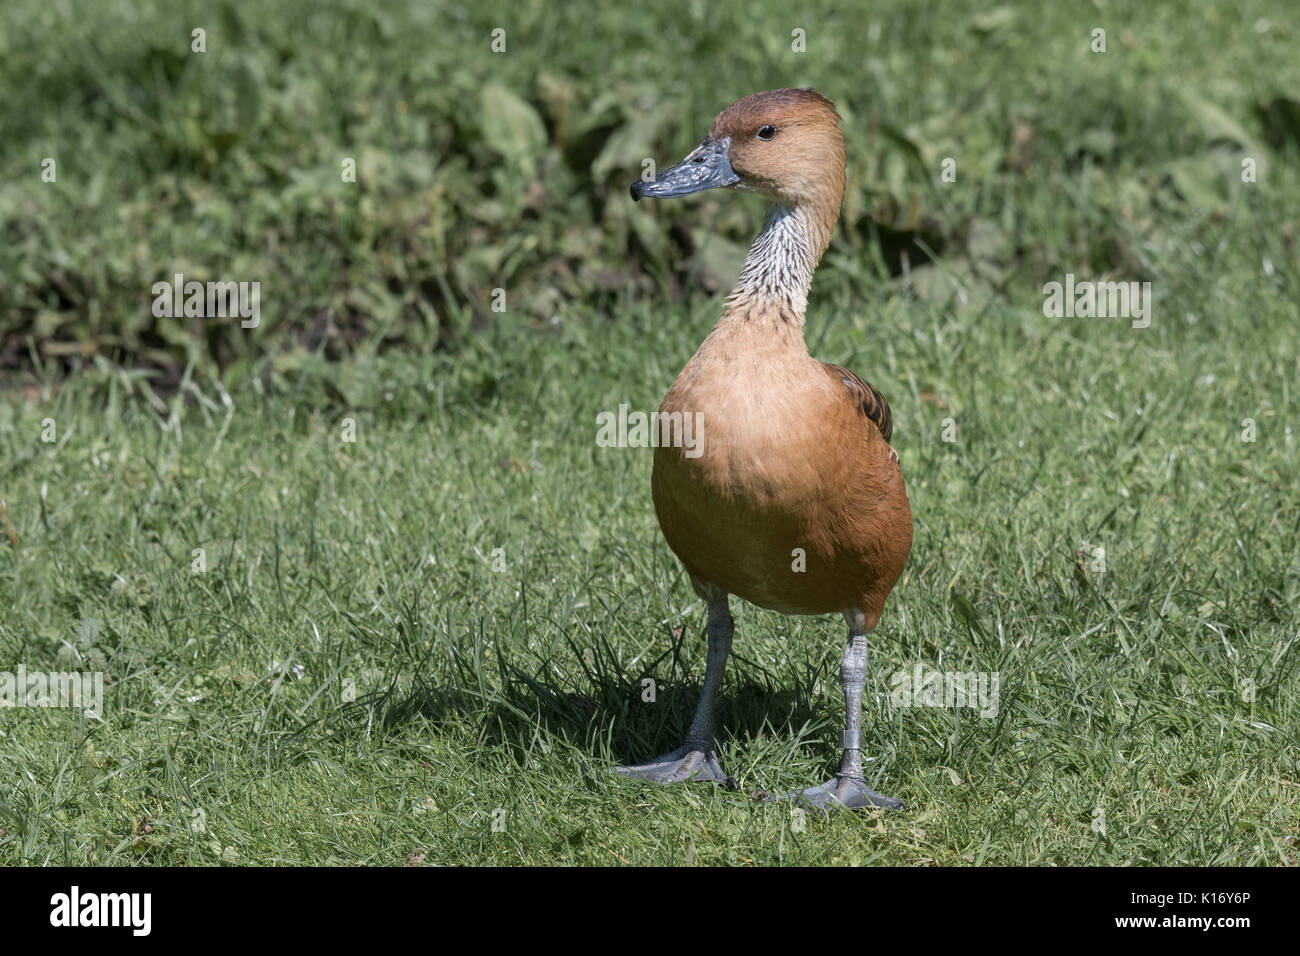 Full length image of a fulvous whistling duck standing on the grass looking left and stretched up Stock Photo